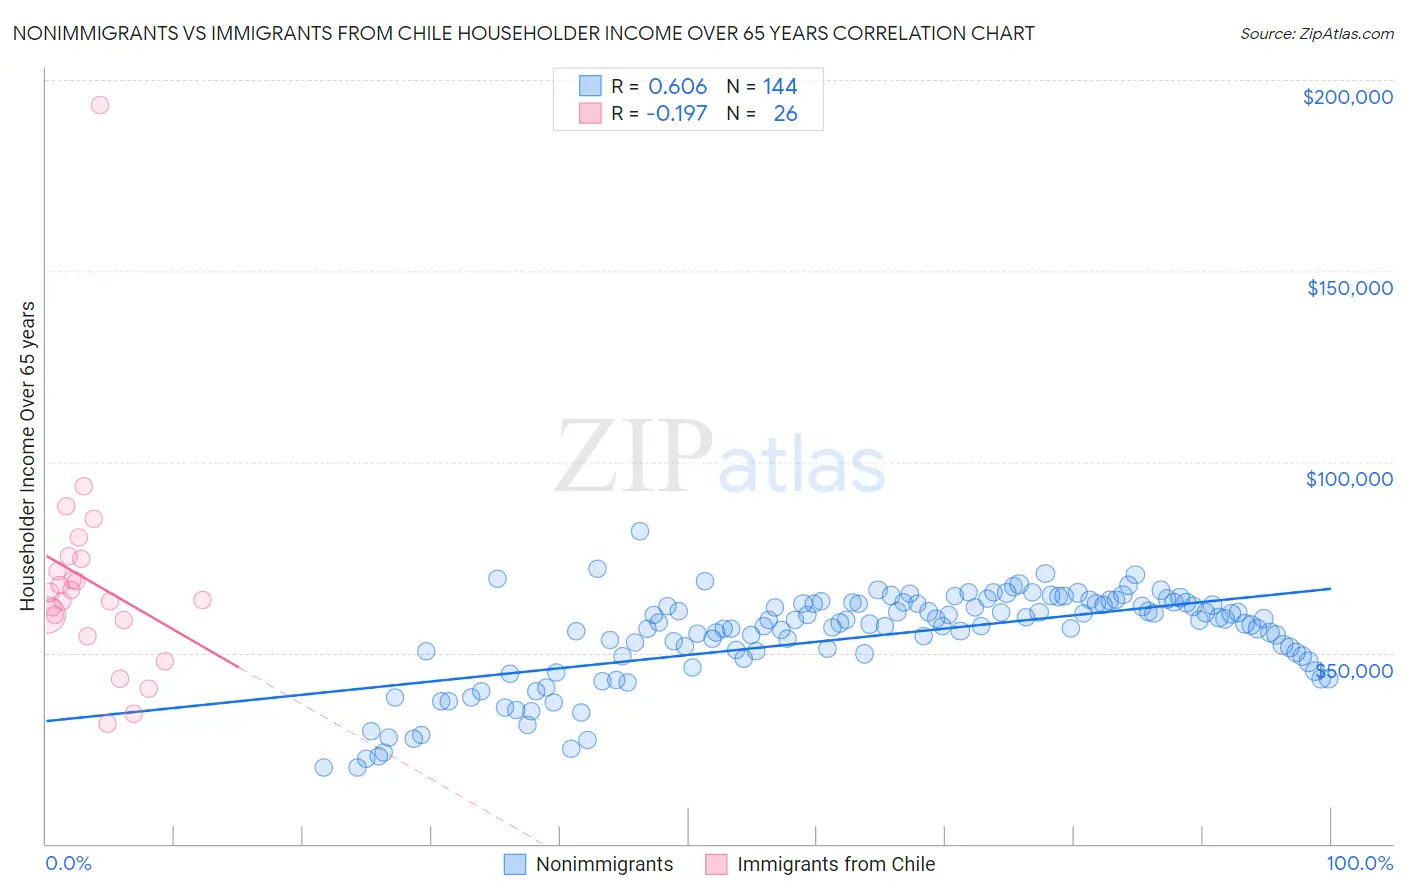 Nonimmigrants vs Immigrants from Chile Householder Income Over 65 years